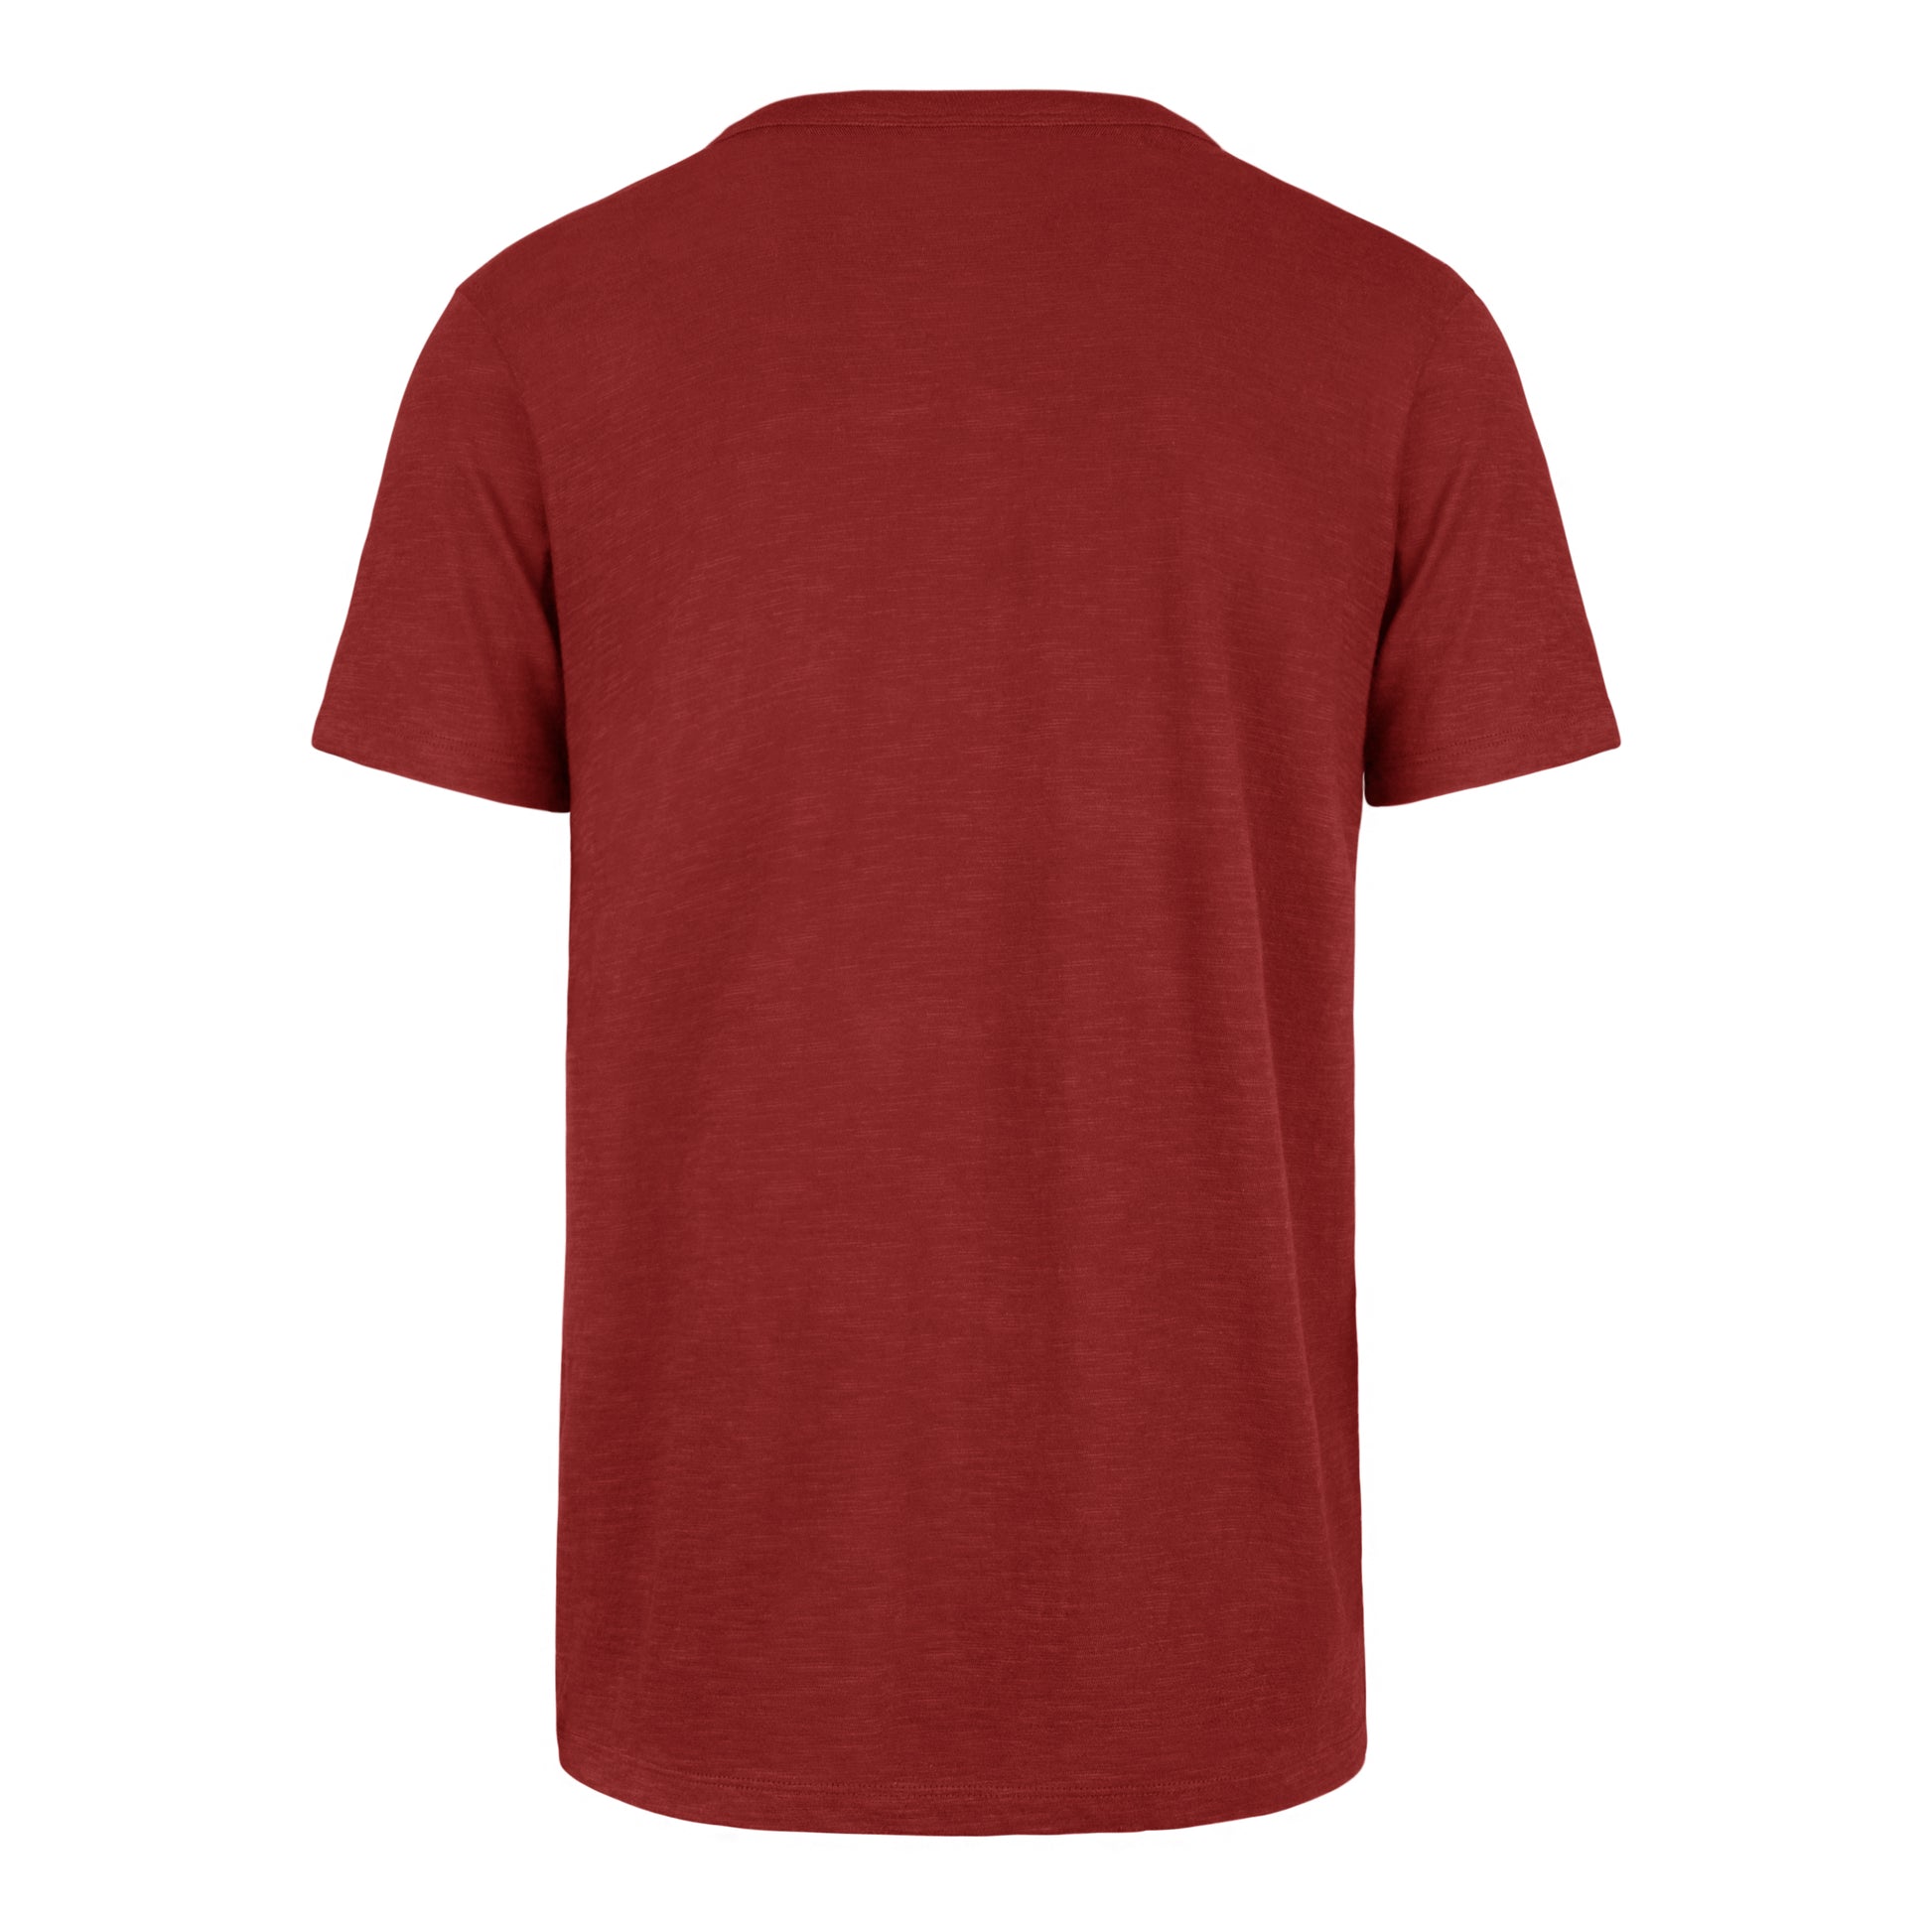 Back: Blank heather red tee